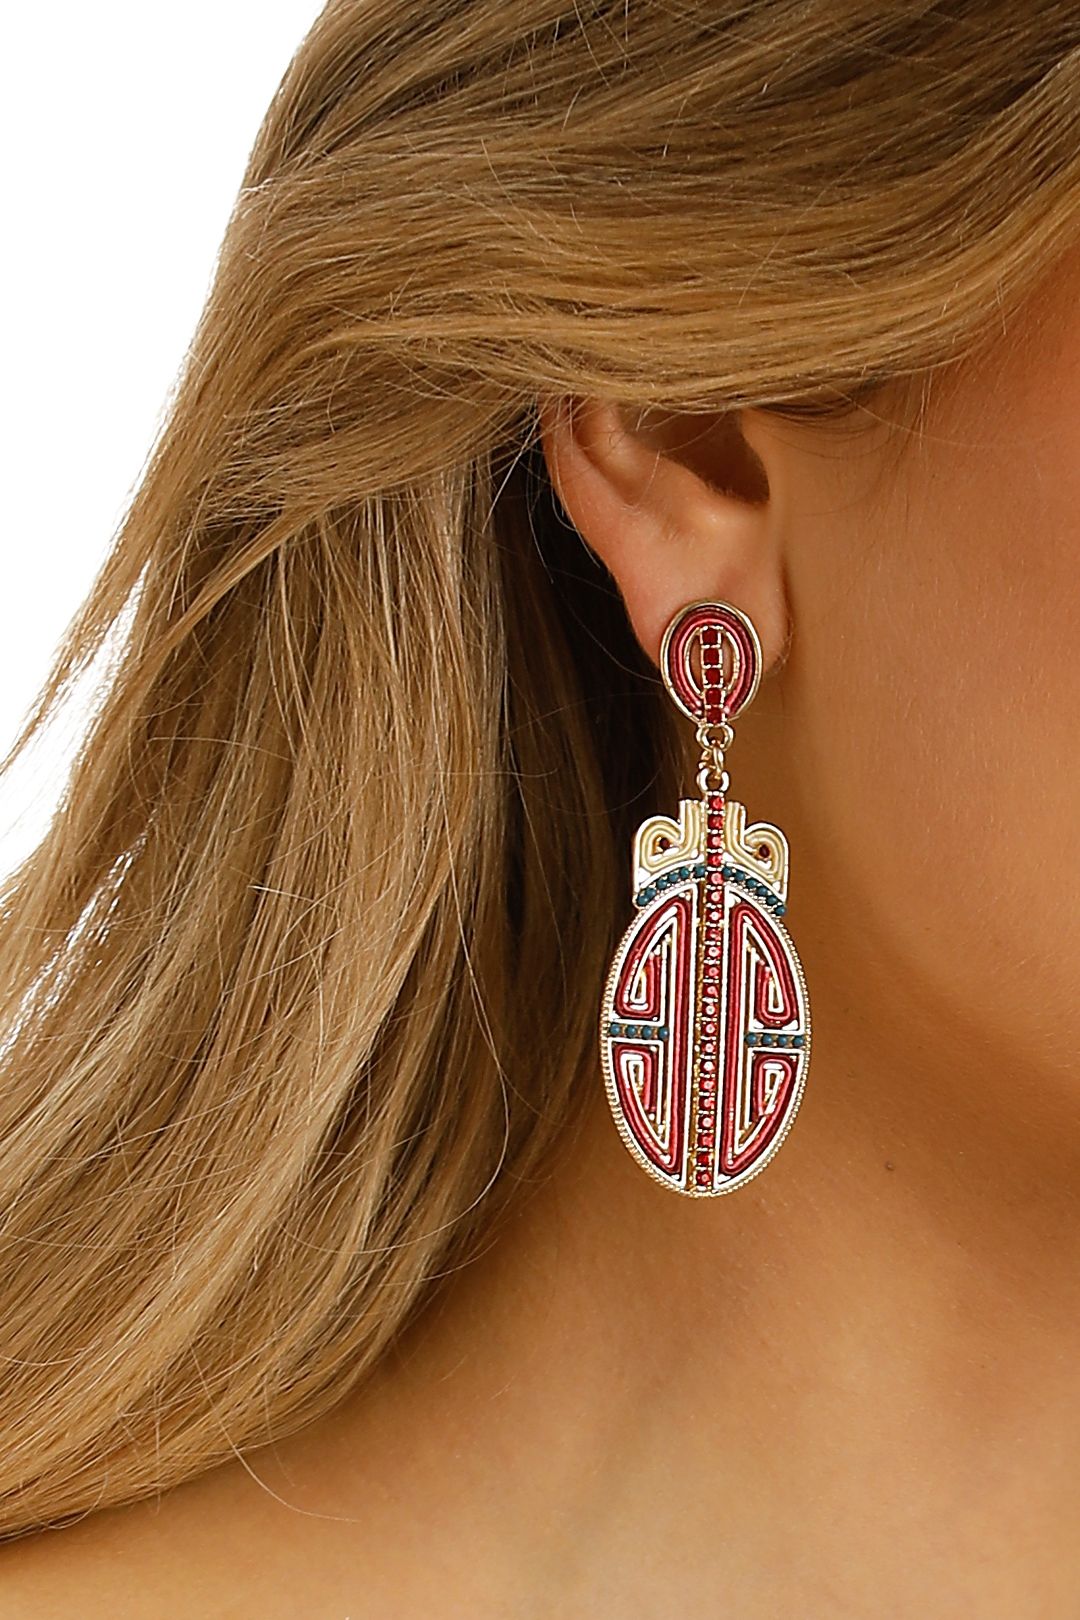 Adorne - Oriental Statement Earrings - Red Gold - Product